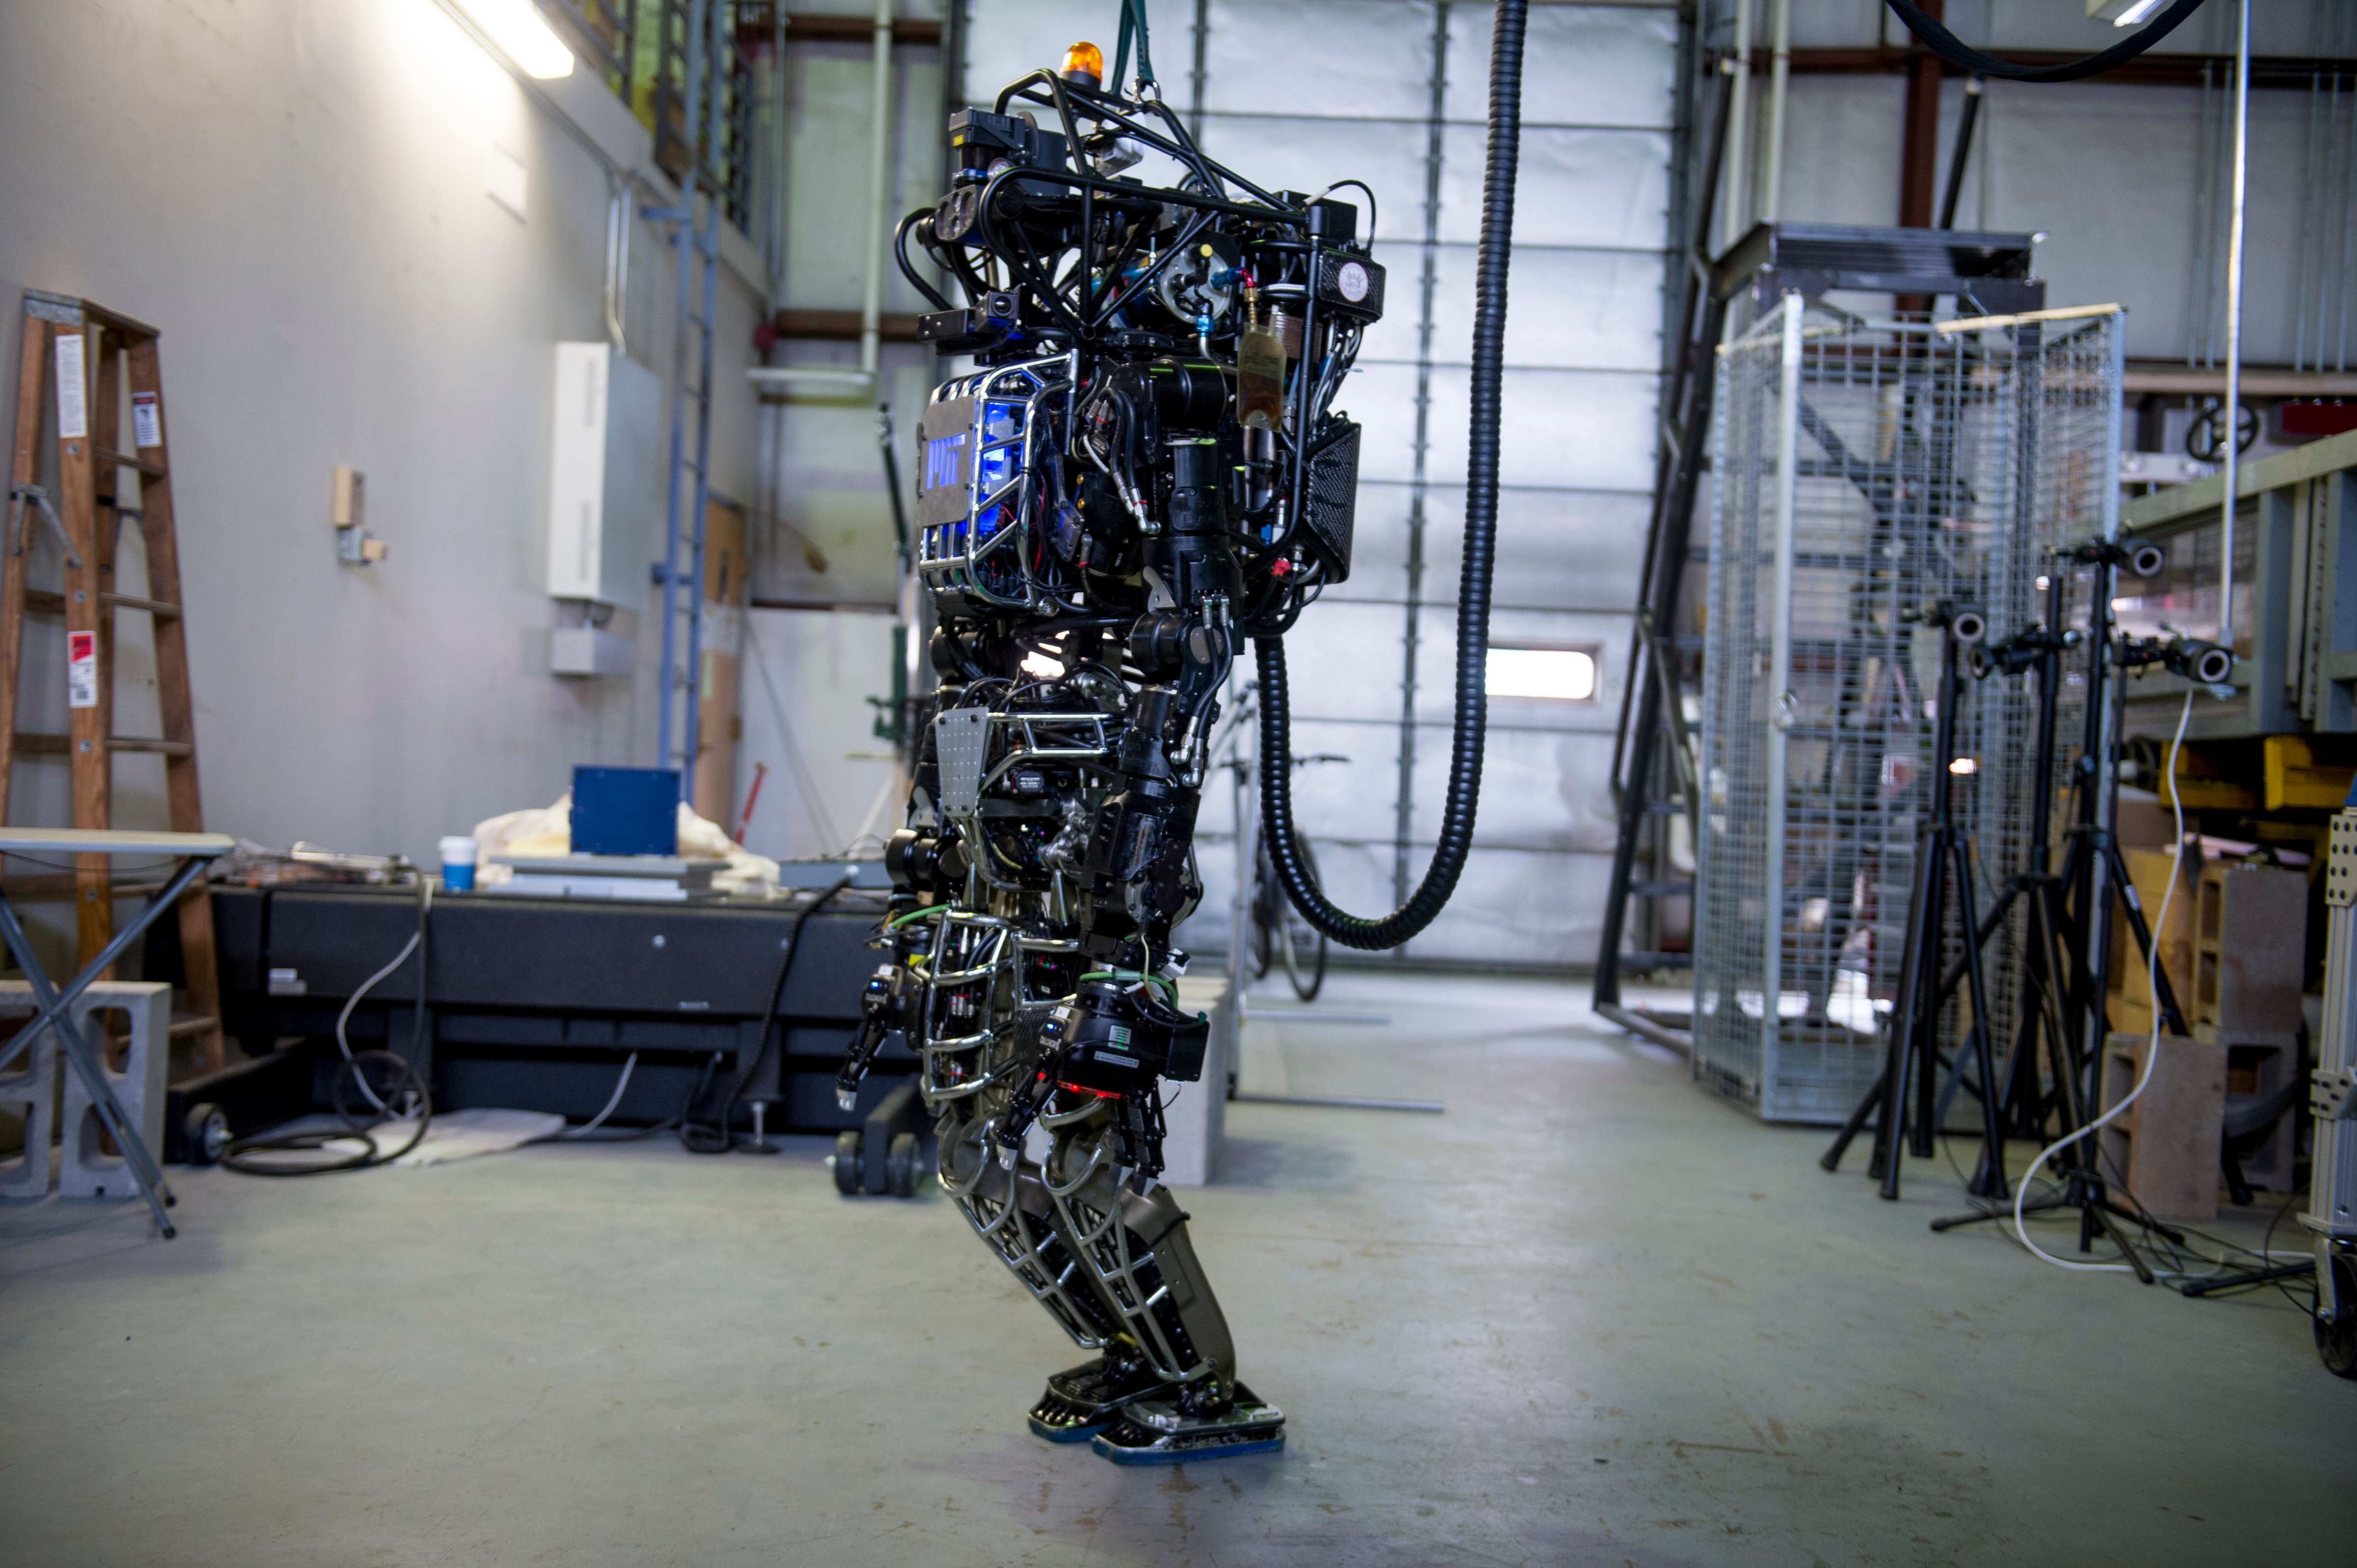 The capabilities of the Atlas robot are demonstrated during the Massachusetts Institute of Technology's Computer Science and Artificial Intelligence Laboratory's Demo Day on April 6, 2013 in Boston, Massachusetts. (Christian Science Monitor&mdash;Christian Science Monitor/Getty Images)